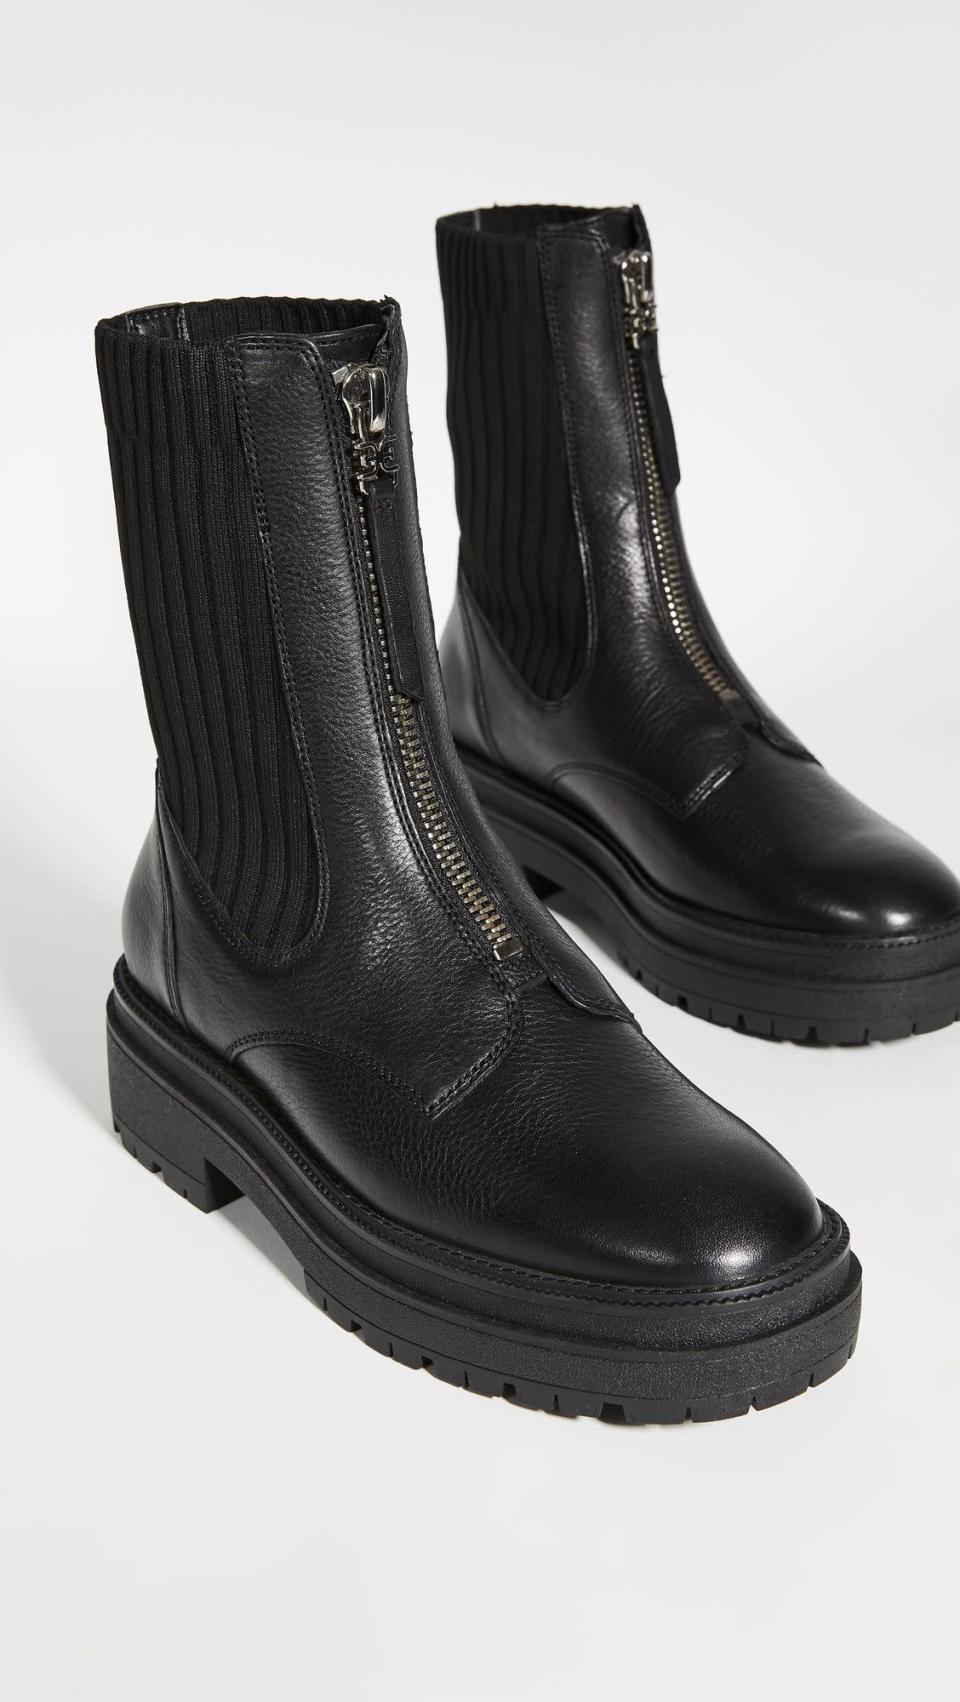 Konvention kran religion 25 Winter Boots That Look Cool But Don't Cost a Ton